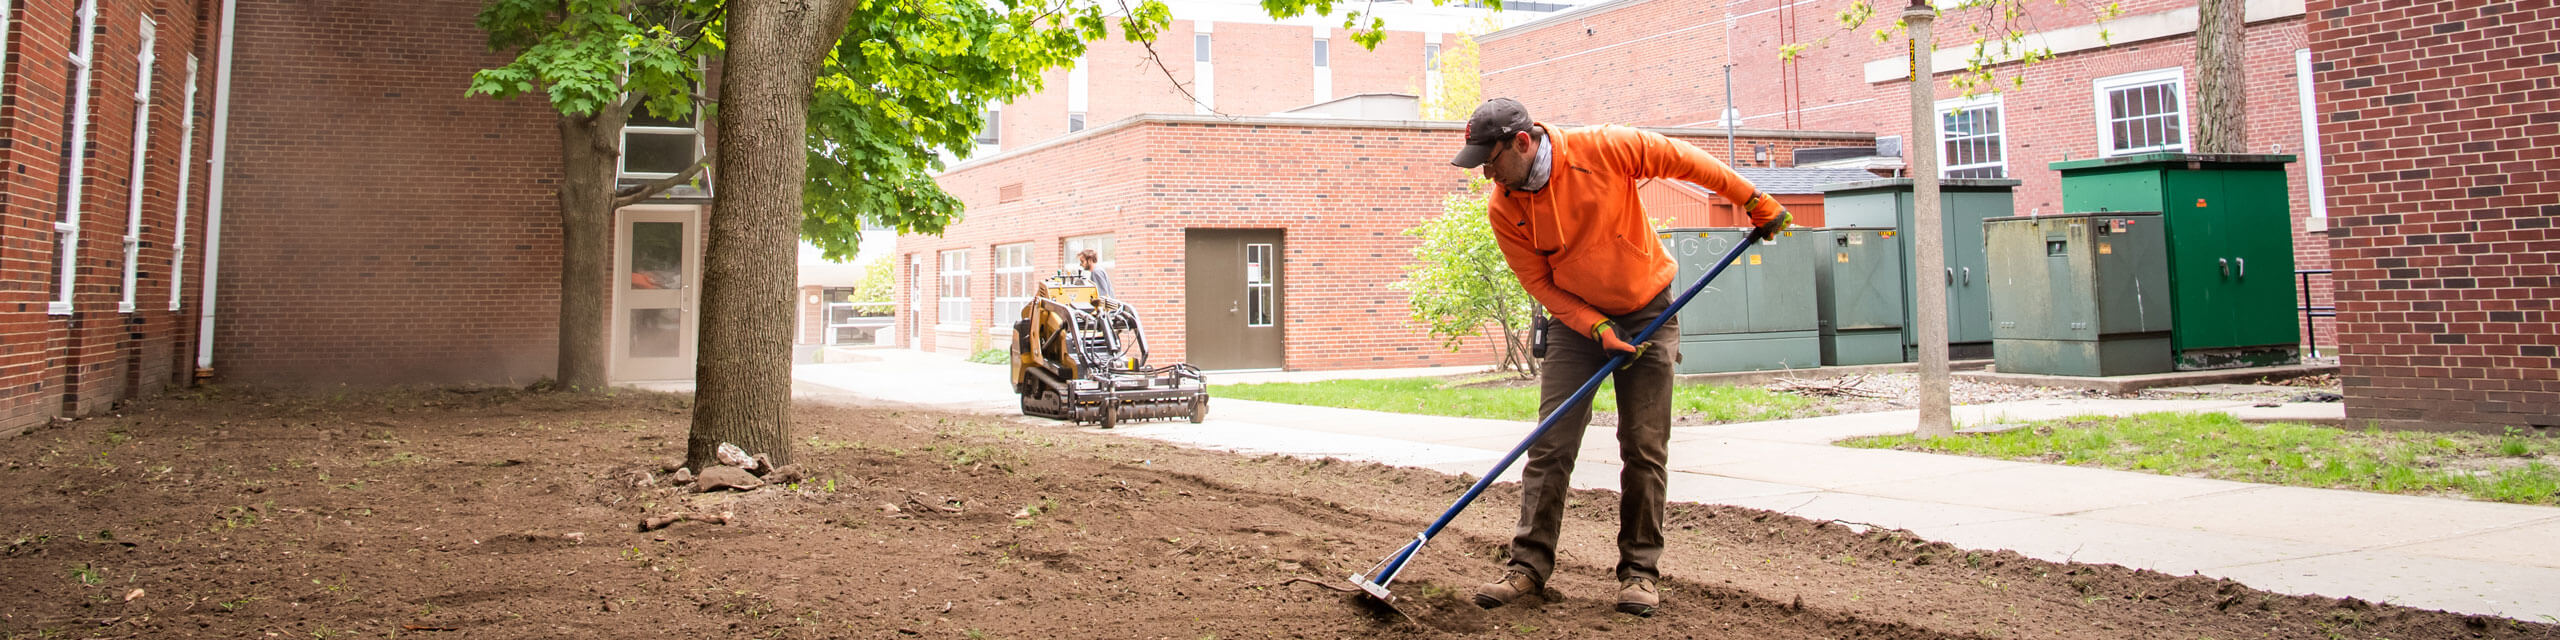 Grounds workers maintain the grass around the quad.